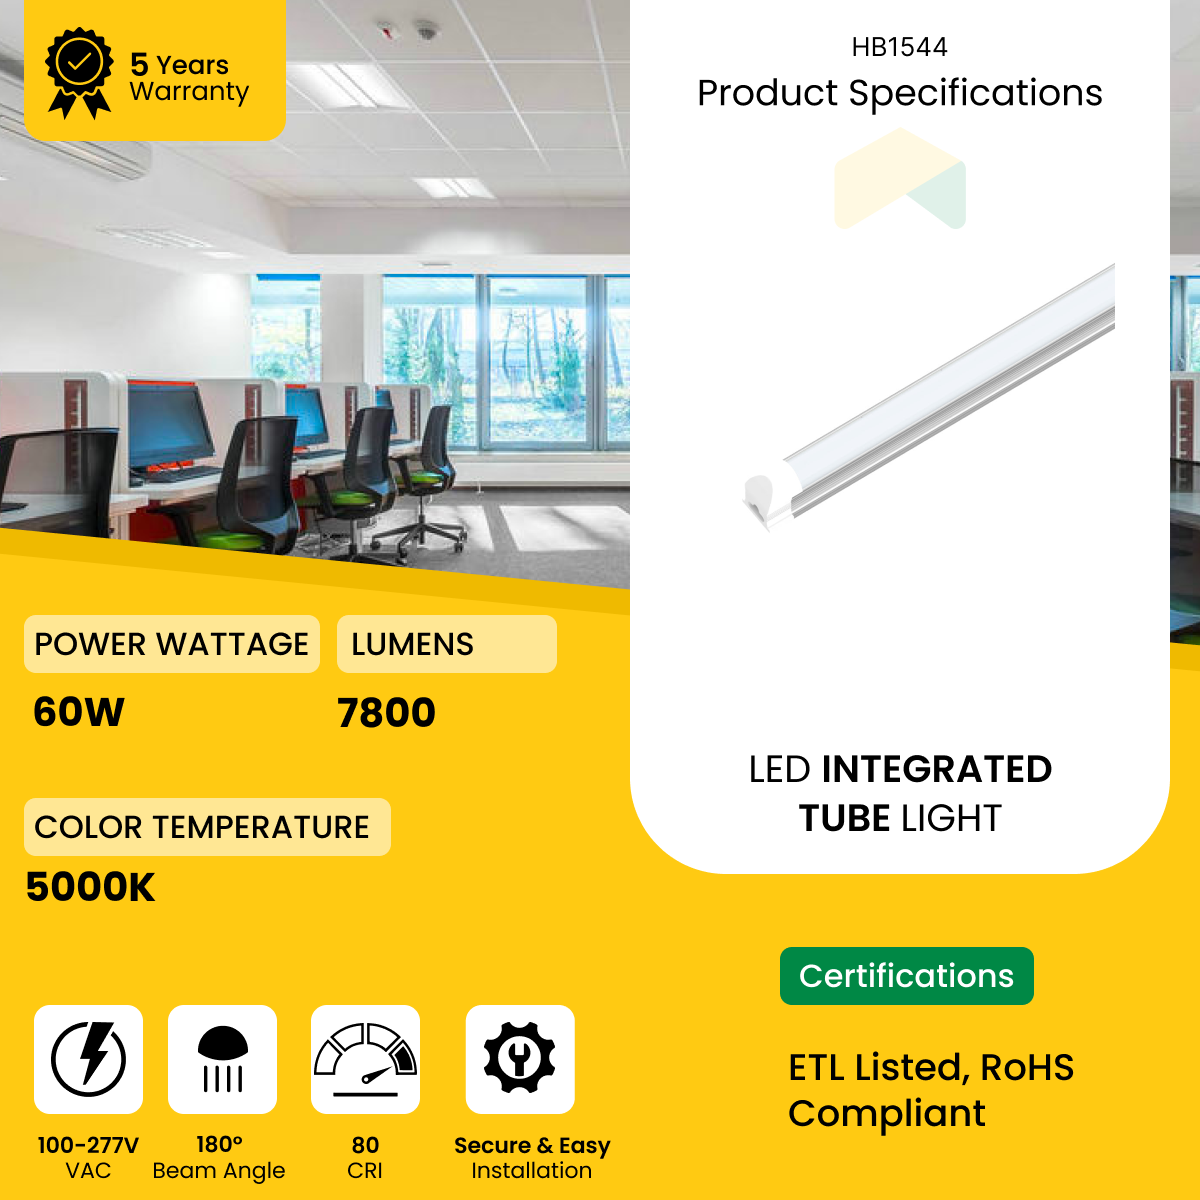 8ft LED Integrated Tube - 60W - AC120V - 5000K - 7800 Lumens, Traic Dimmable - Frosted Linkable Tube - AC 120-277V - 0-10V Dimmable - IP66 - UL Listed - DLC Premium Listed - 5 Years Warranty- 25-Pack